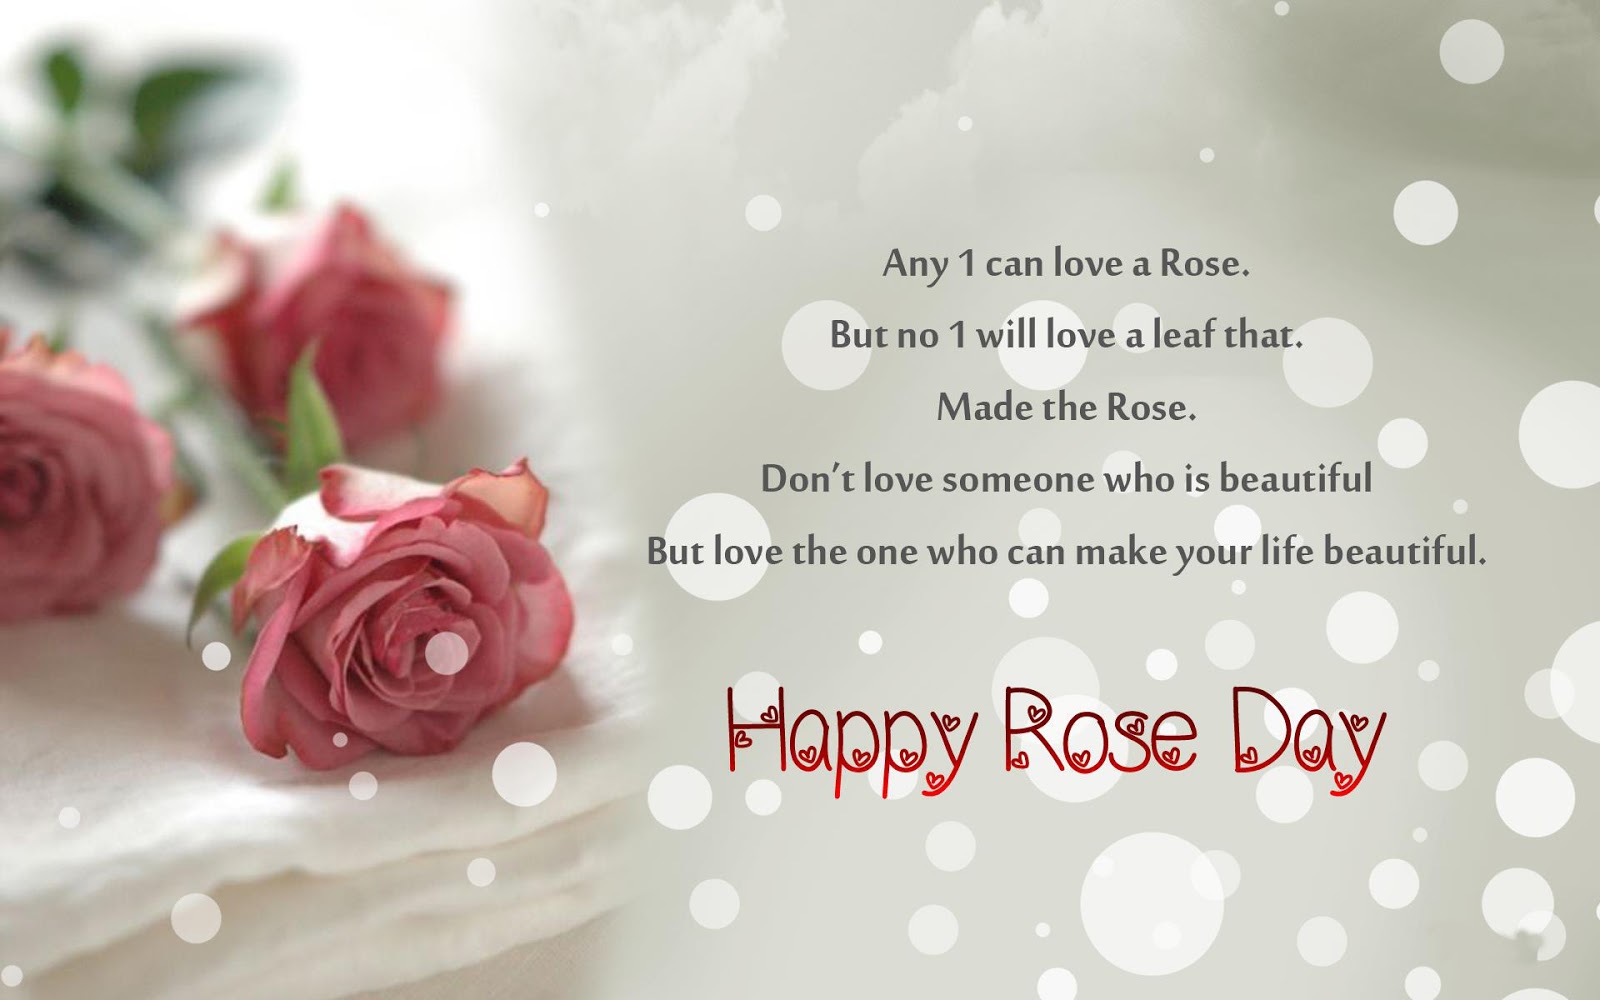 Happy Rose Day Wishes Sms Message Image